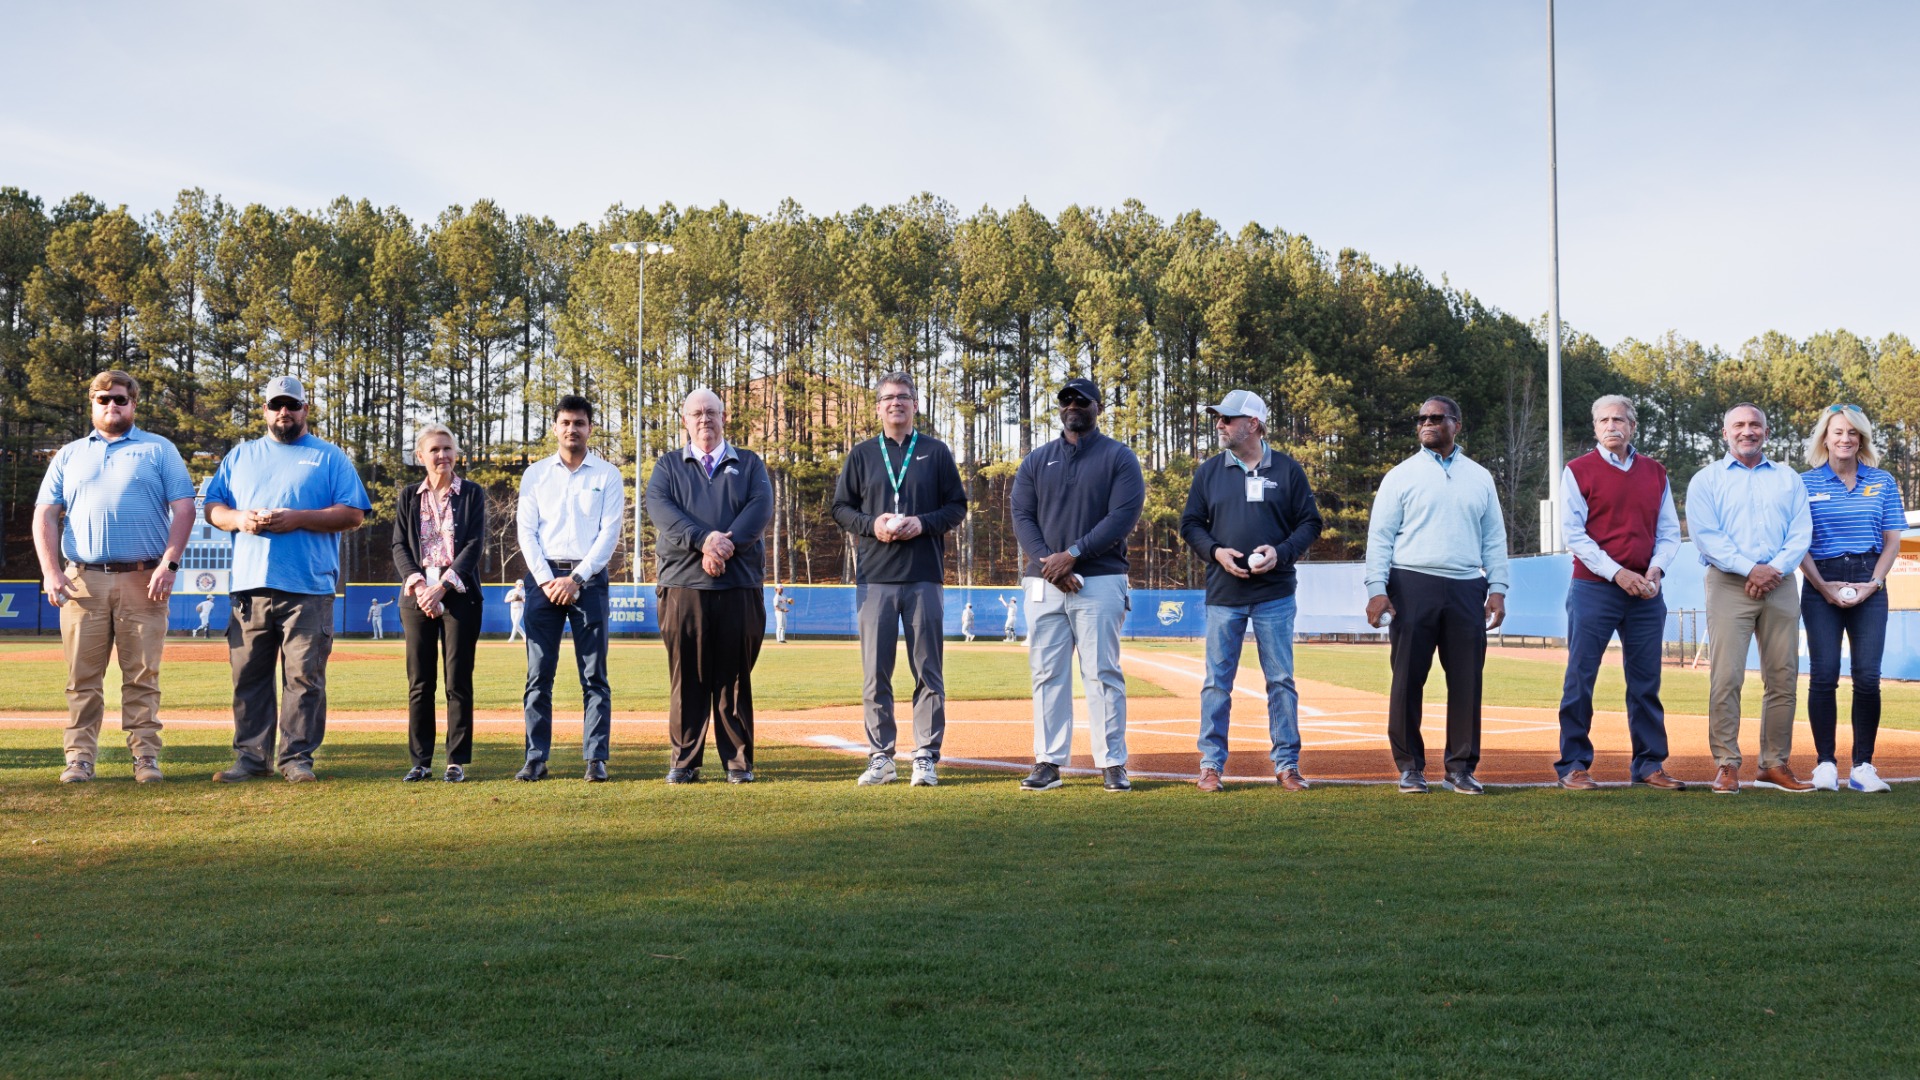 Slide 0 - Baseball Field Dedication - Thank you to all Fulton County Schools employees and Board Members for your hard work!